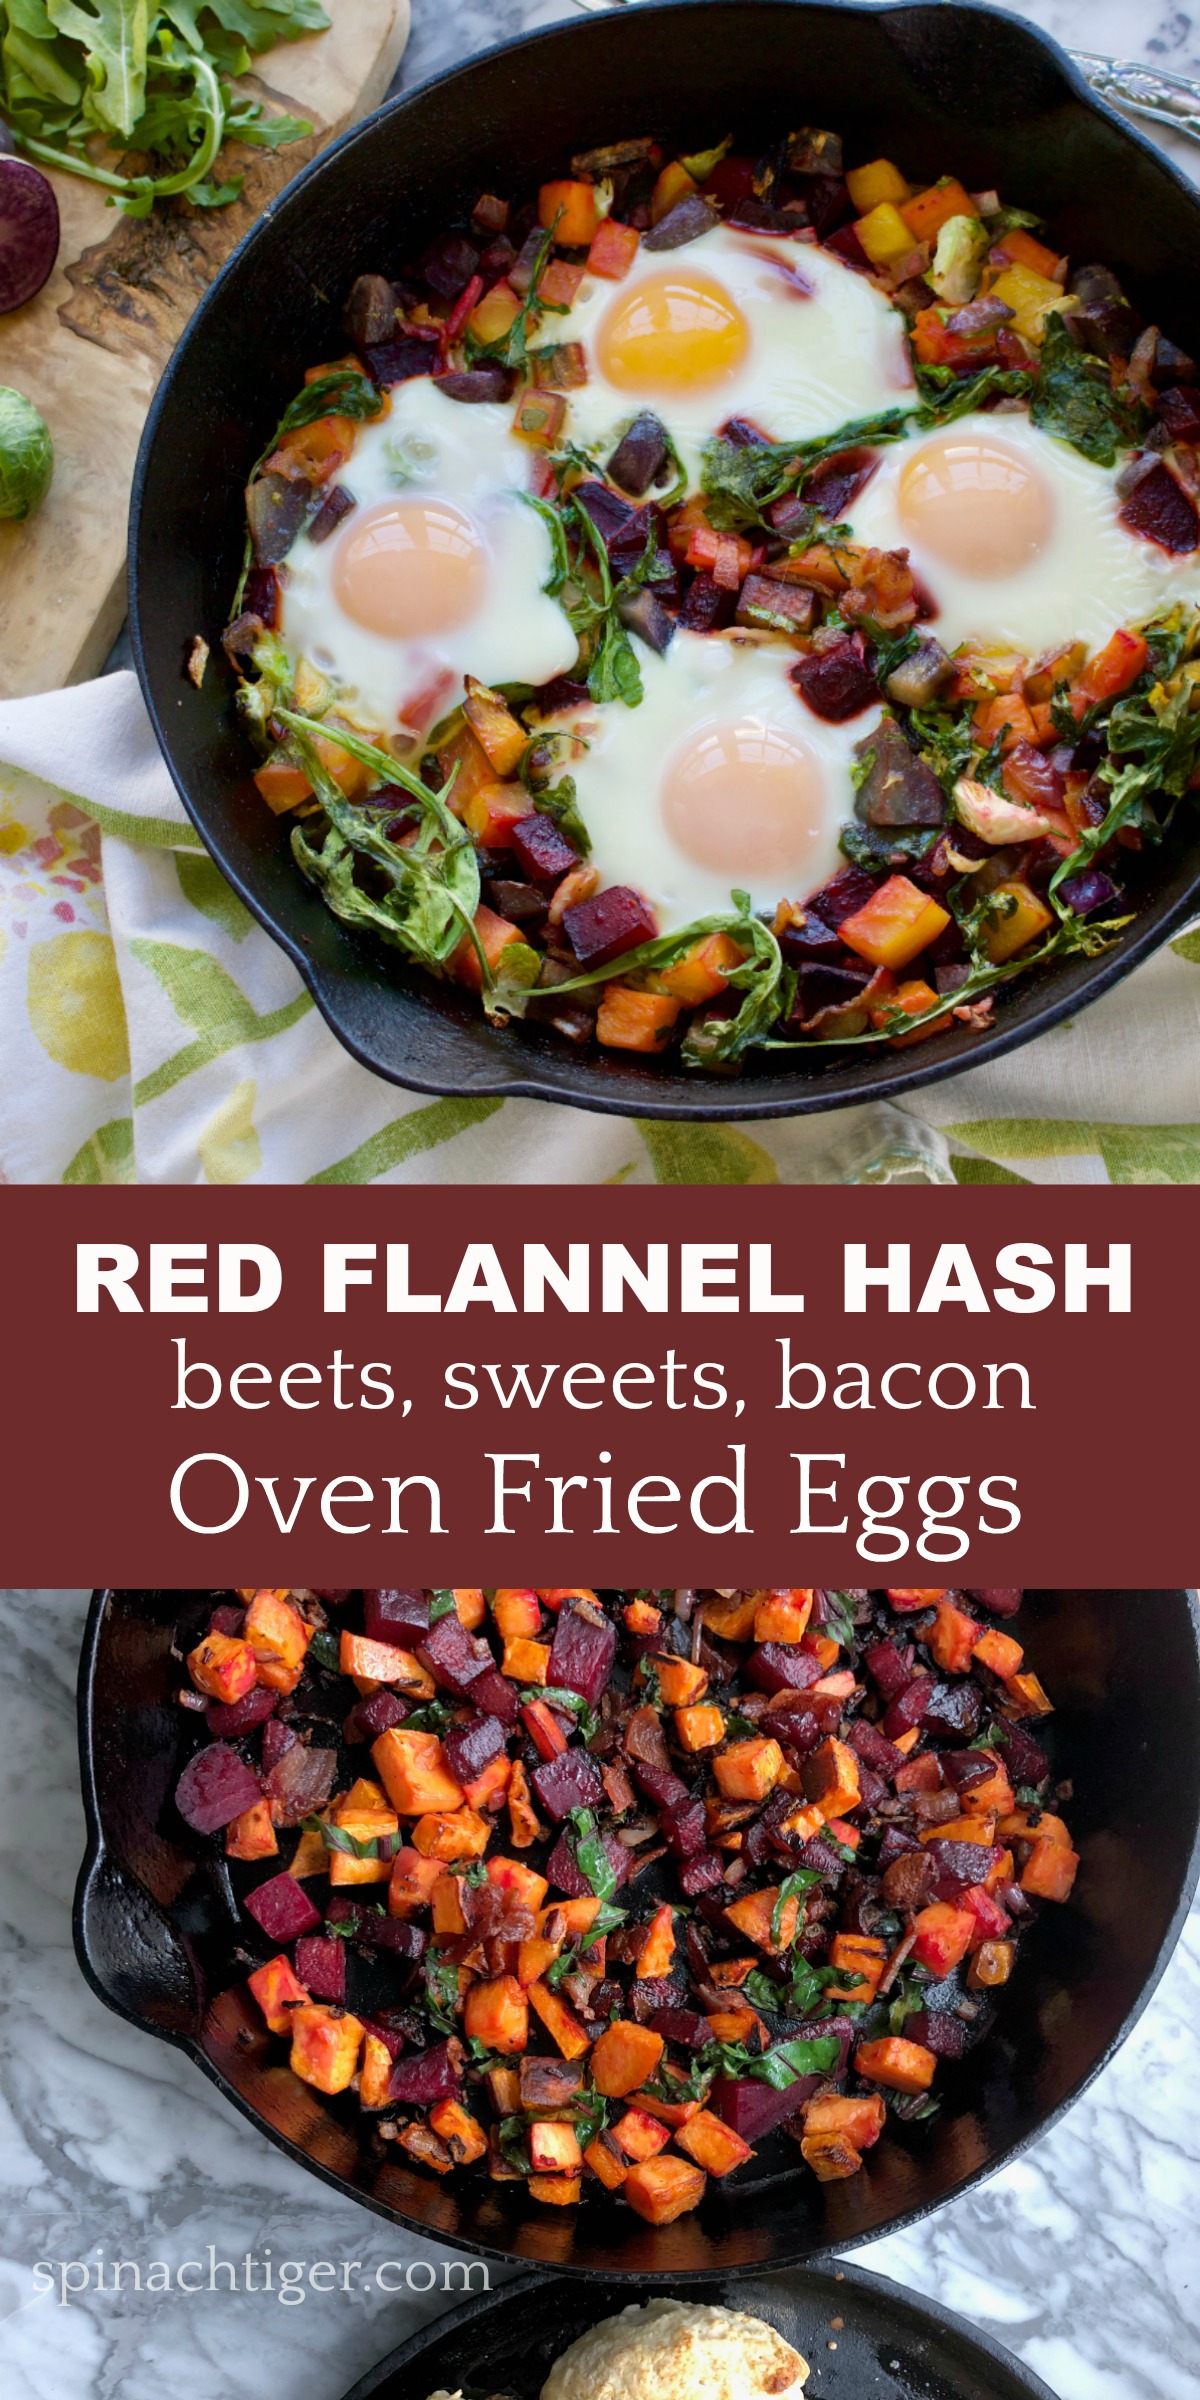 Red Flannel Hash from Spinach tiger